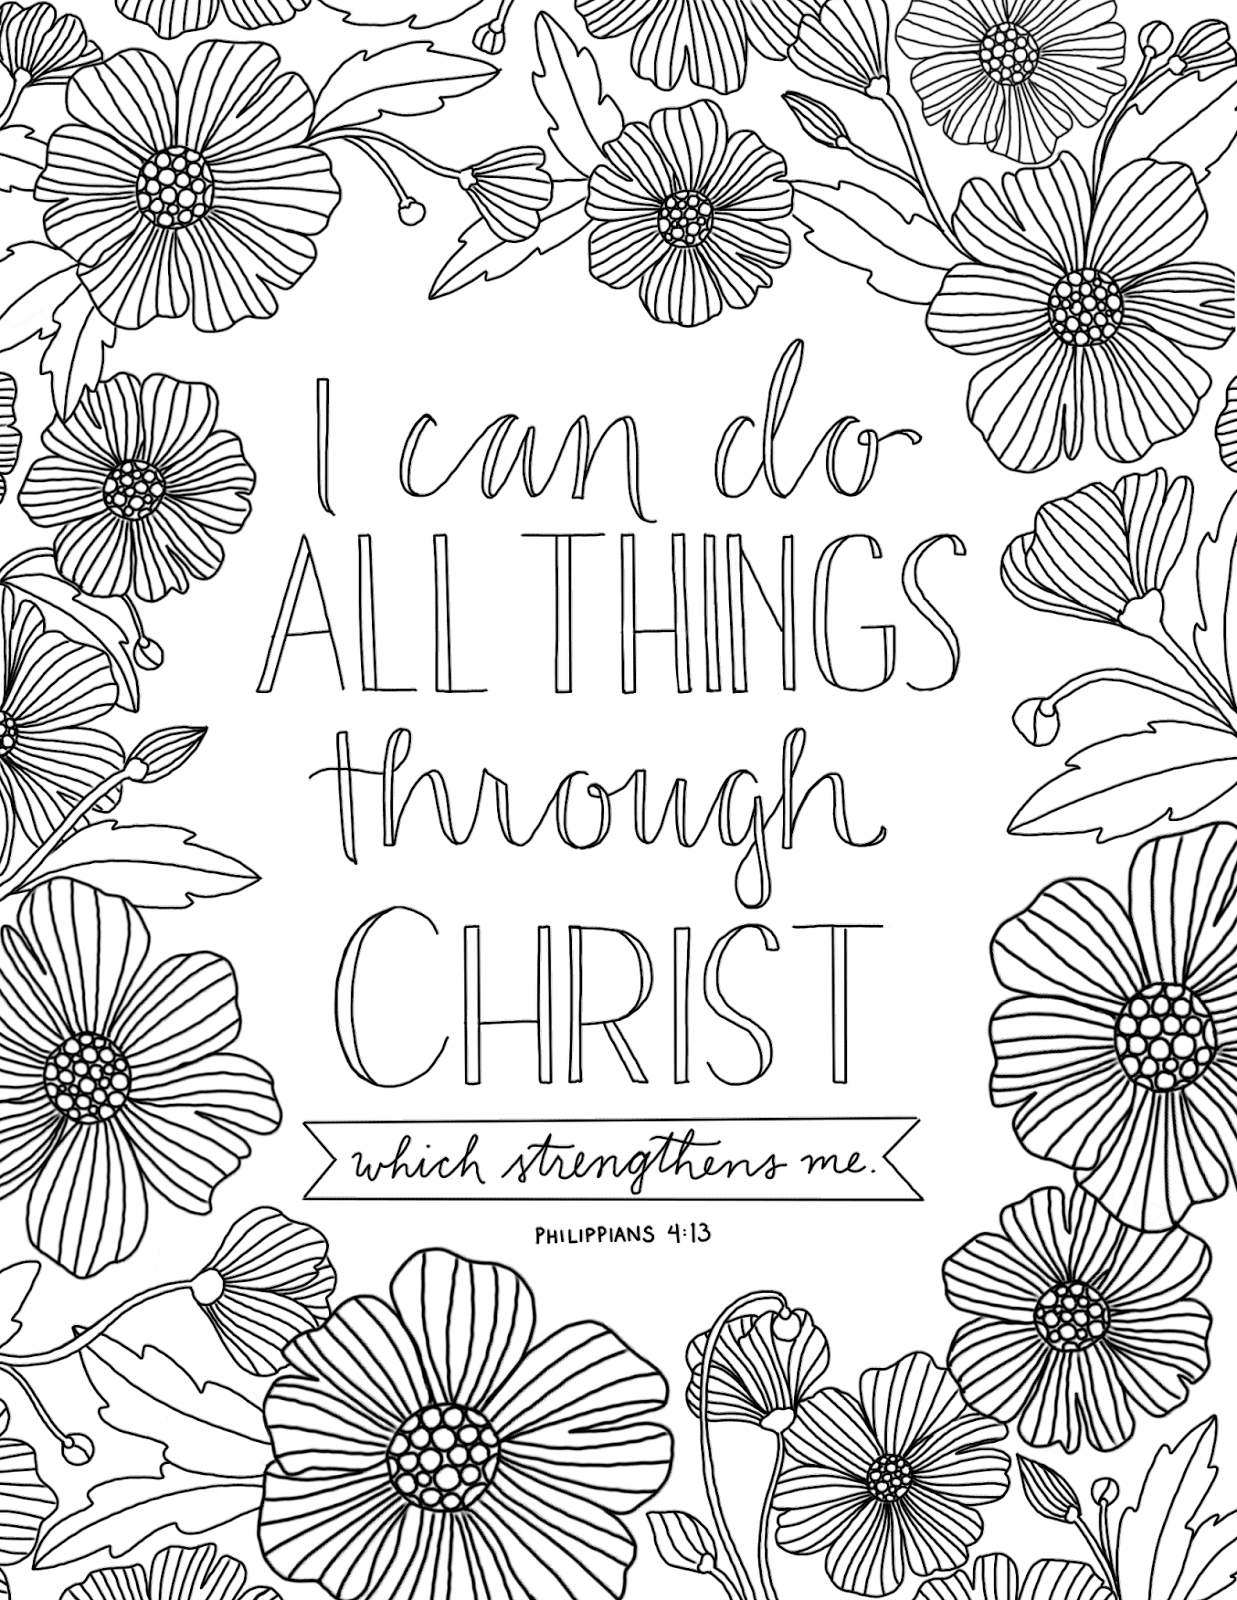 just what i {squeeze} in: All Things through Christ ...